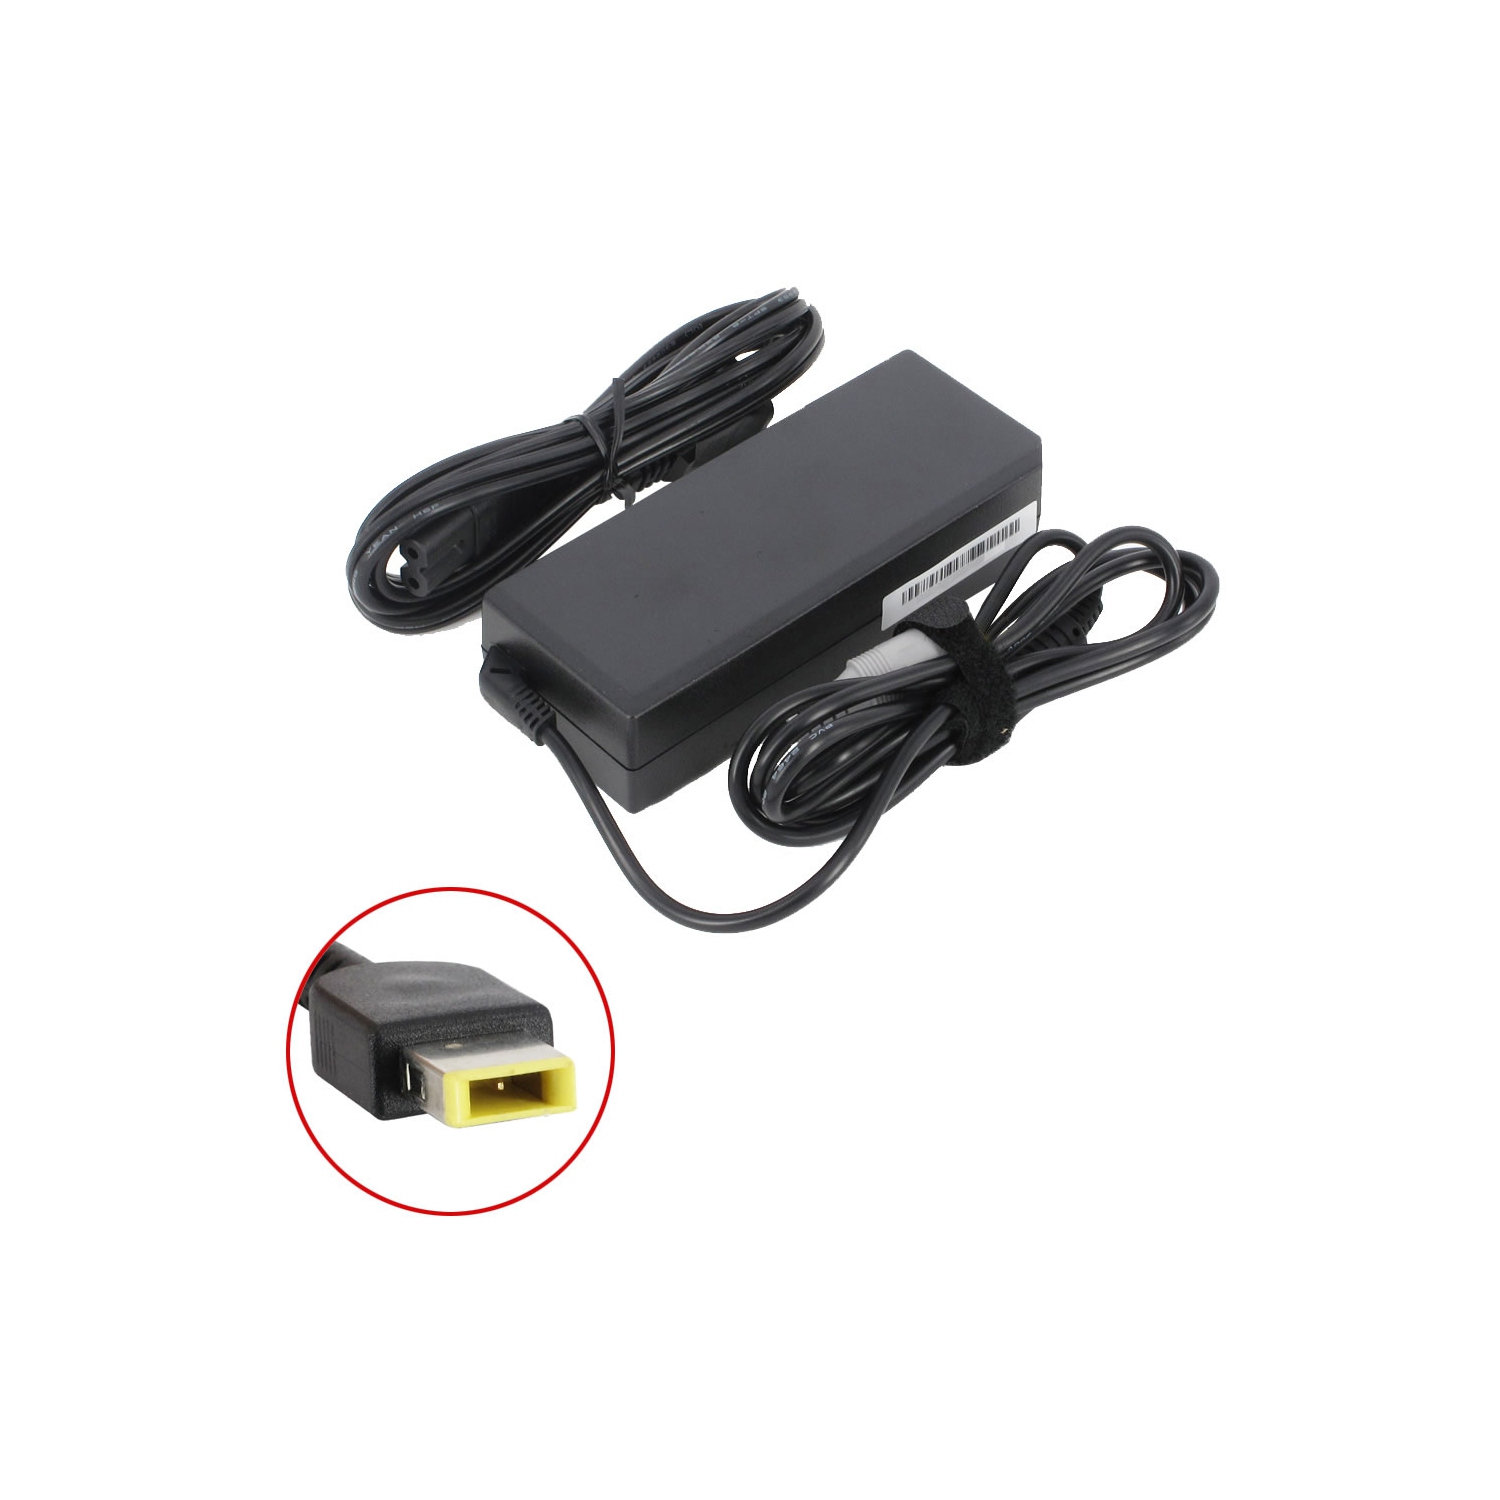 Brand New Laptop AC Adapter for Lenovo Yoga Book 15, 0B47455, 45N0247, ADLX45NDC3A, ADLX65NLC3A, 36200235